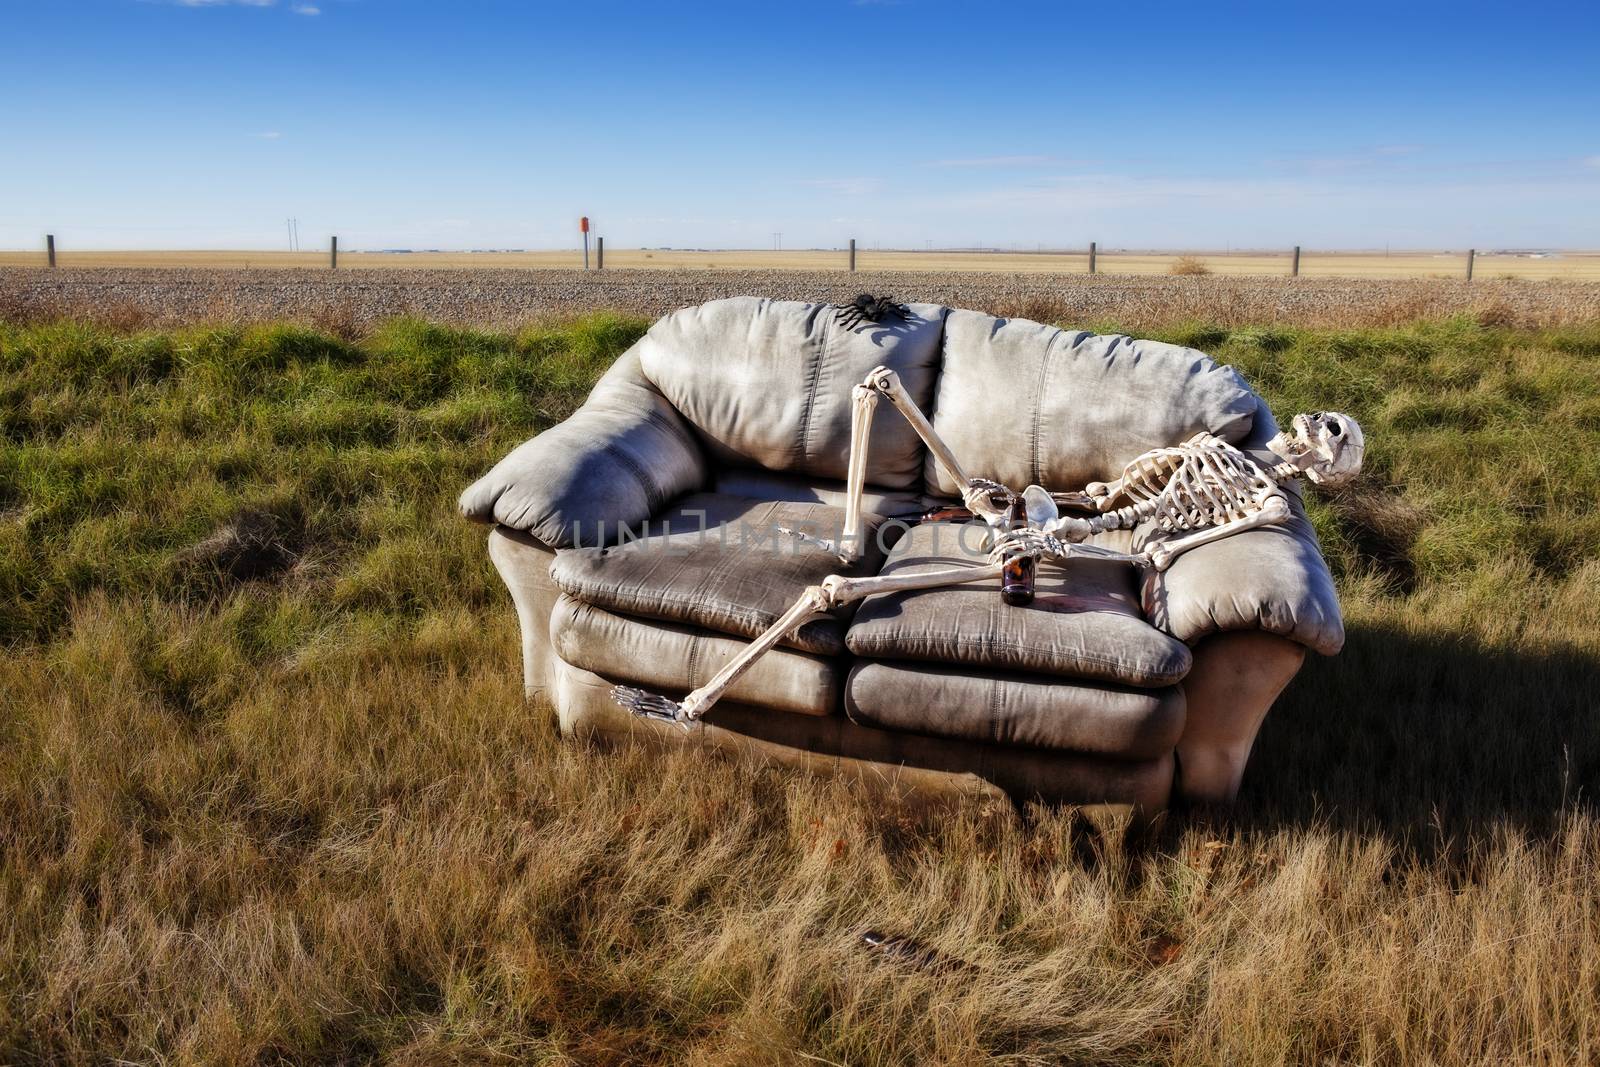 A beer stained party couch haunted by parties past, discarded in a ditch on a rural prairie road.